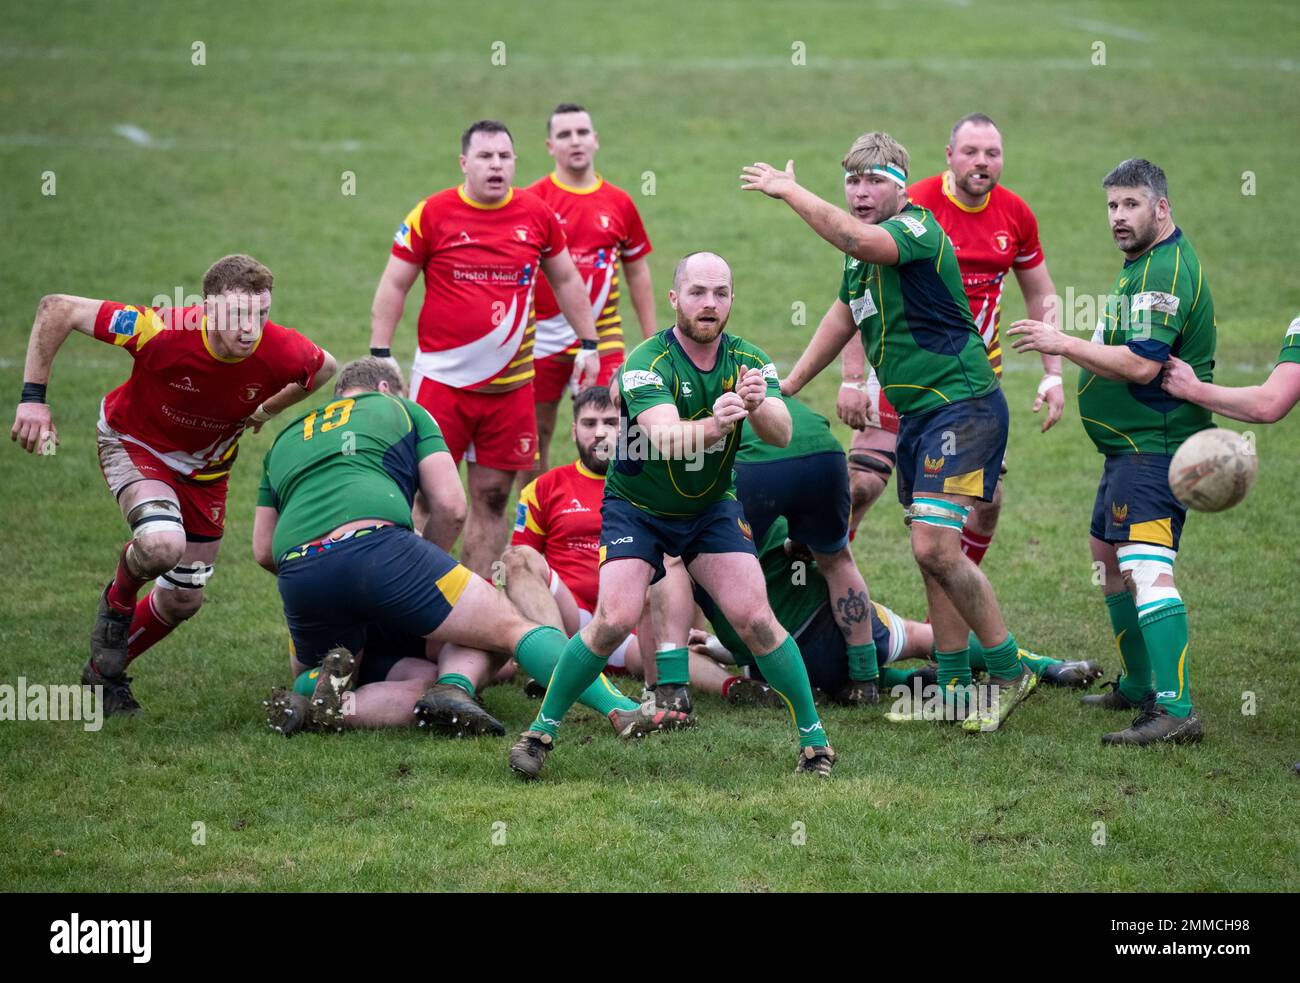 Rugby scrum half passing the ball. Stock Photo